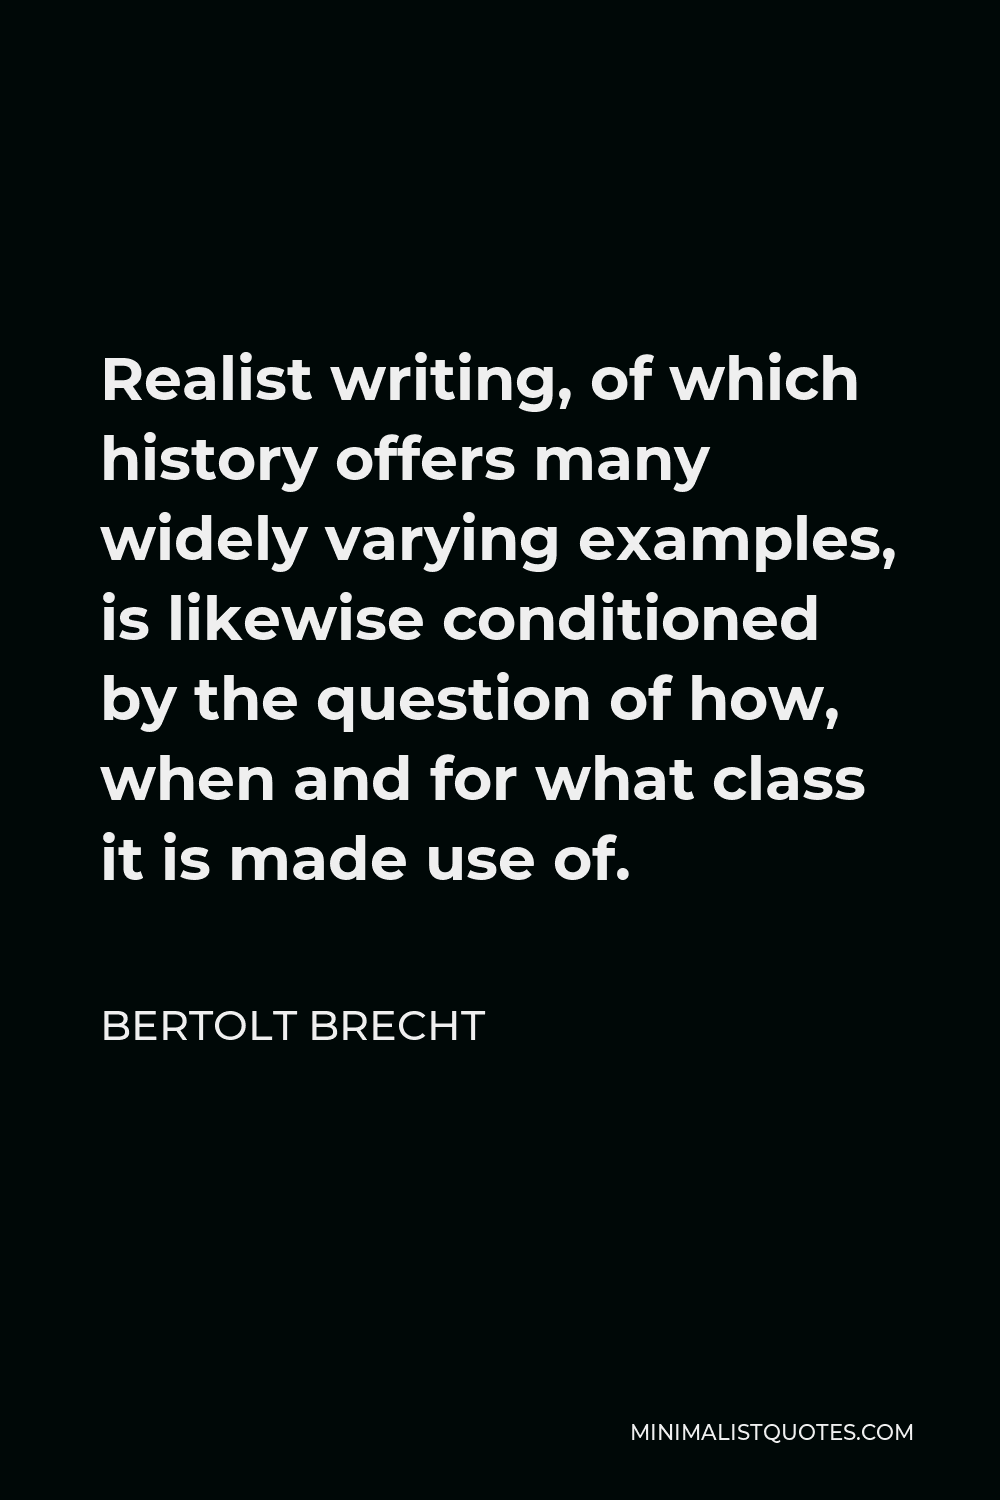 Bertolt Brecht Quote - Realist writing, of which history offers many widely varying examples, is likewise conditioned by the question of how, when and for what class it is made use of.